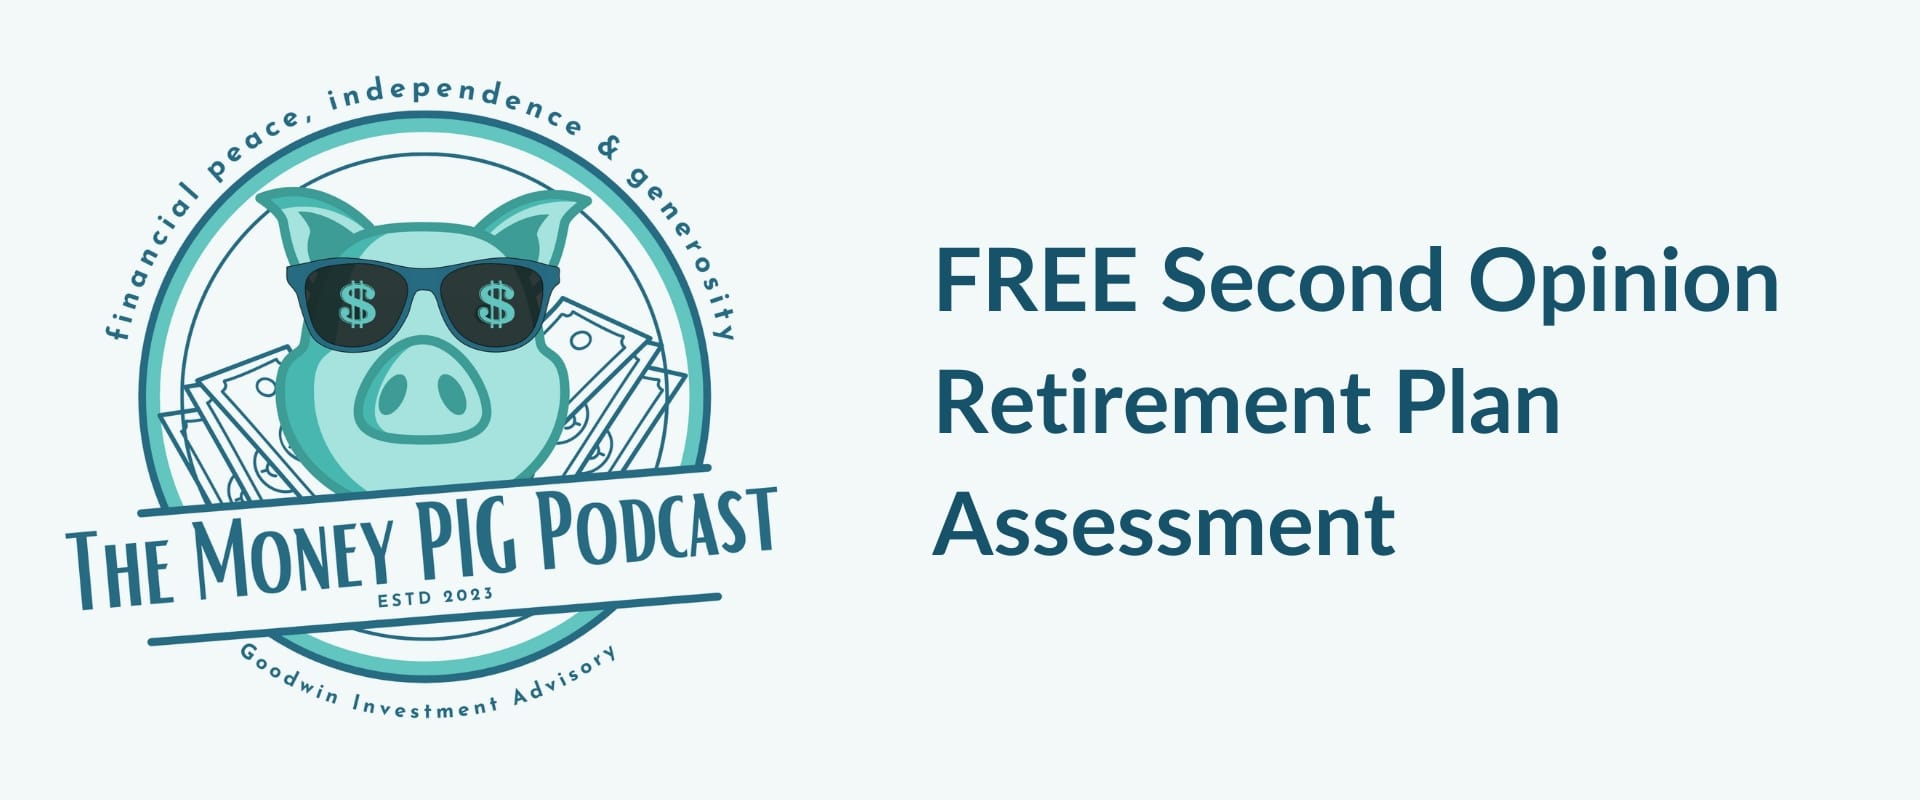 FREE Second Opinion Retirement Plan Assessment